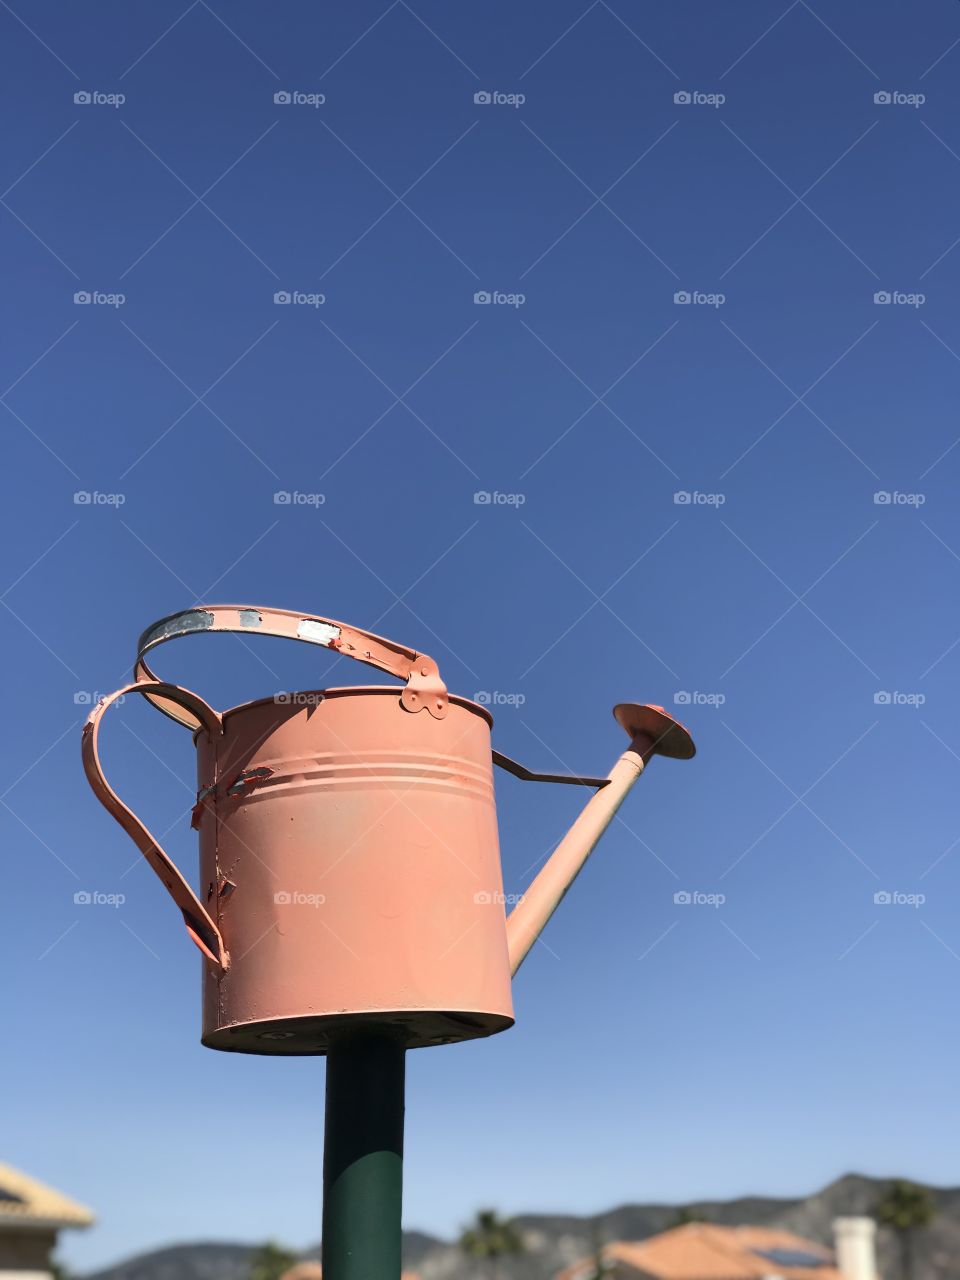 Watering can and sky